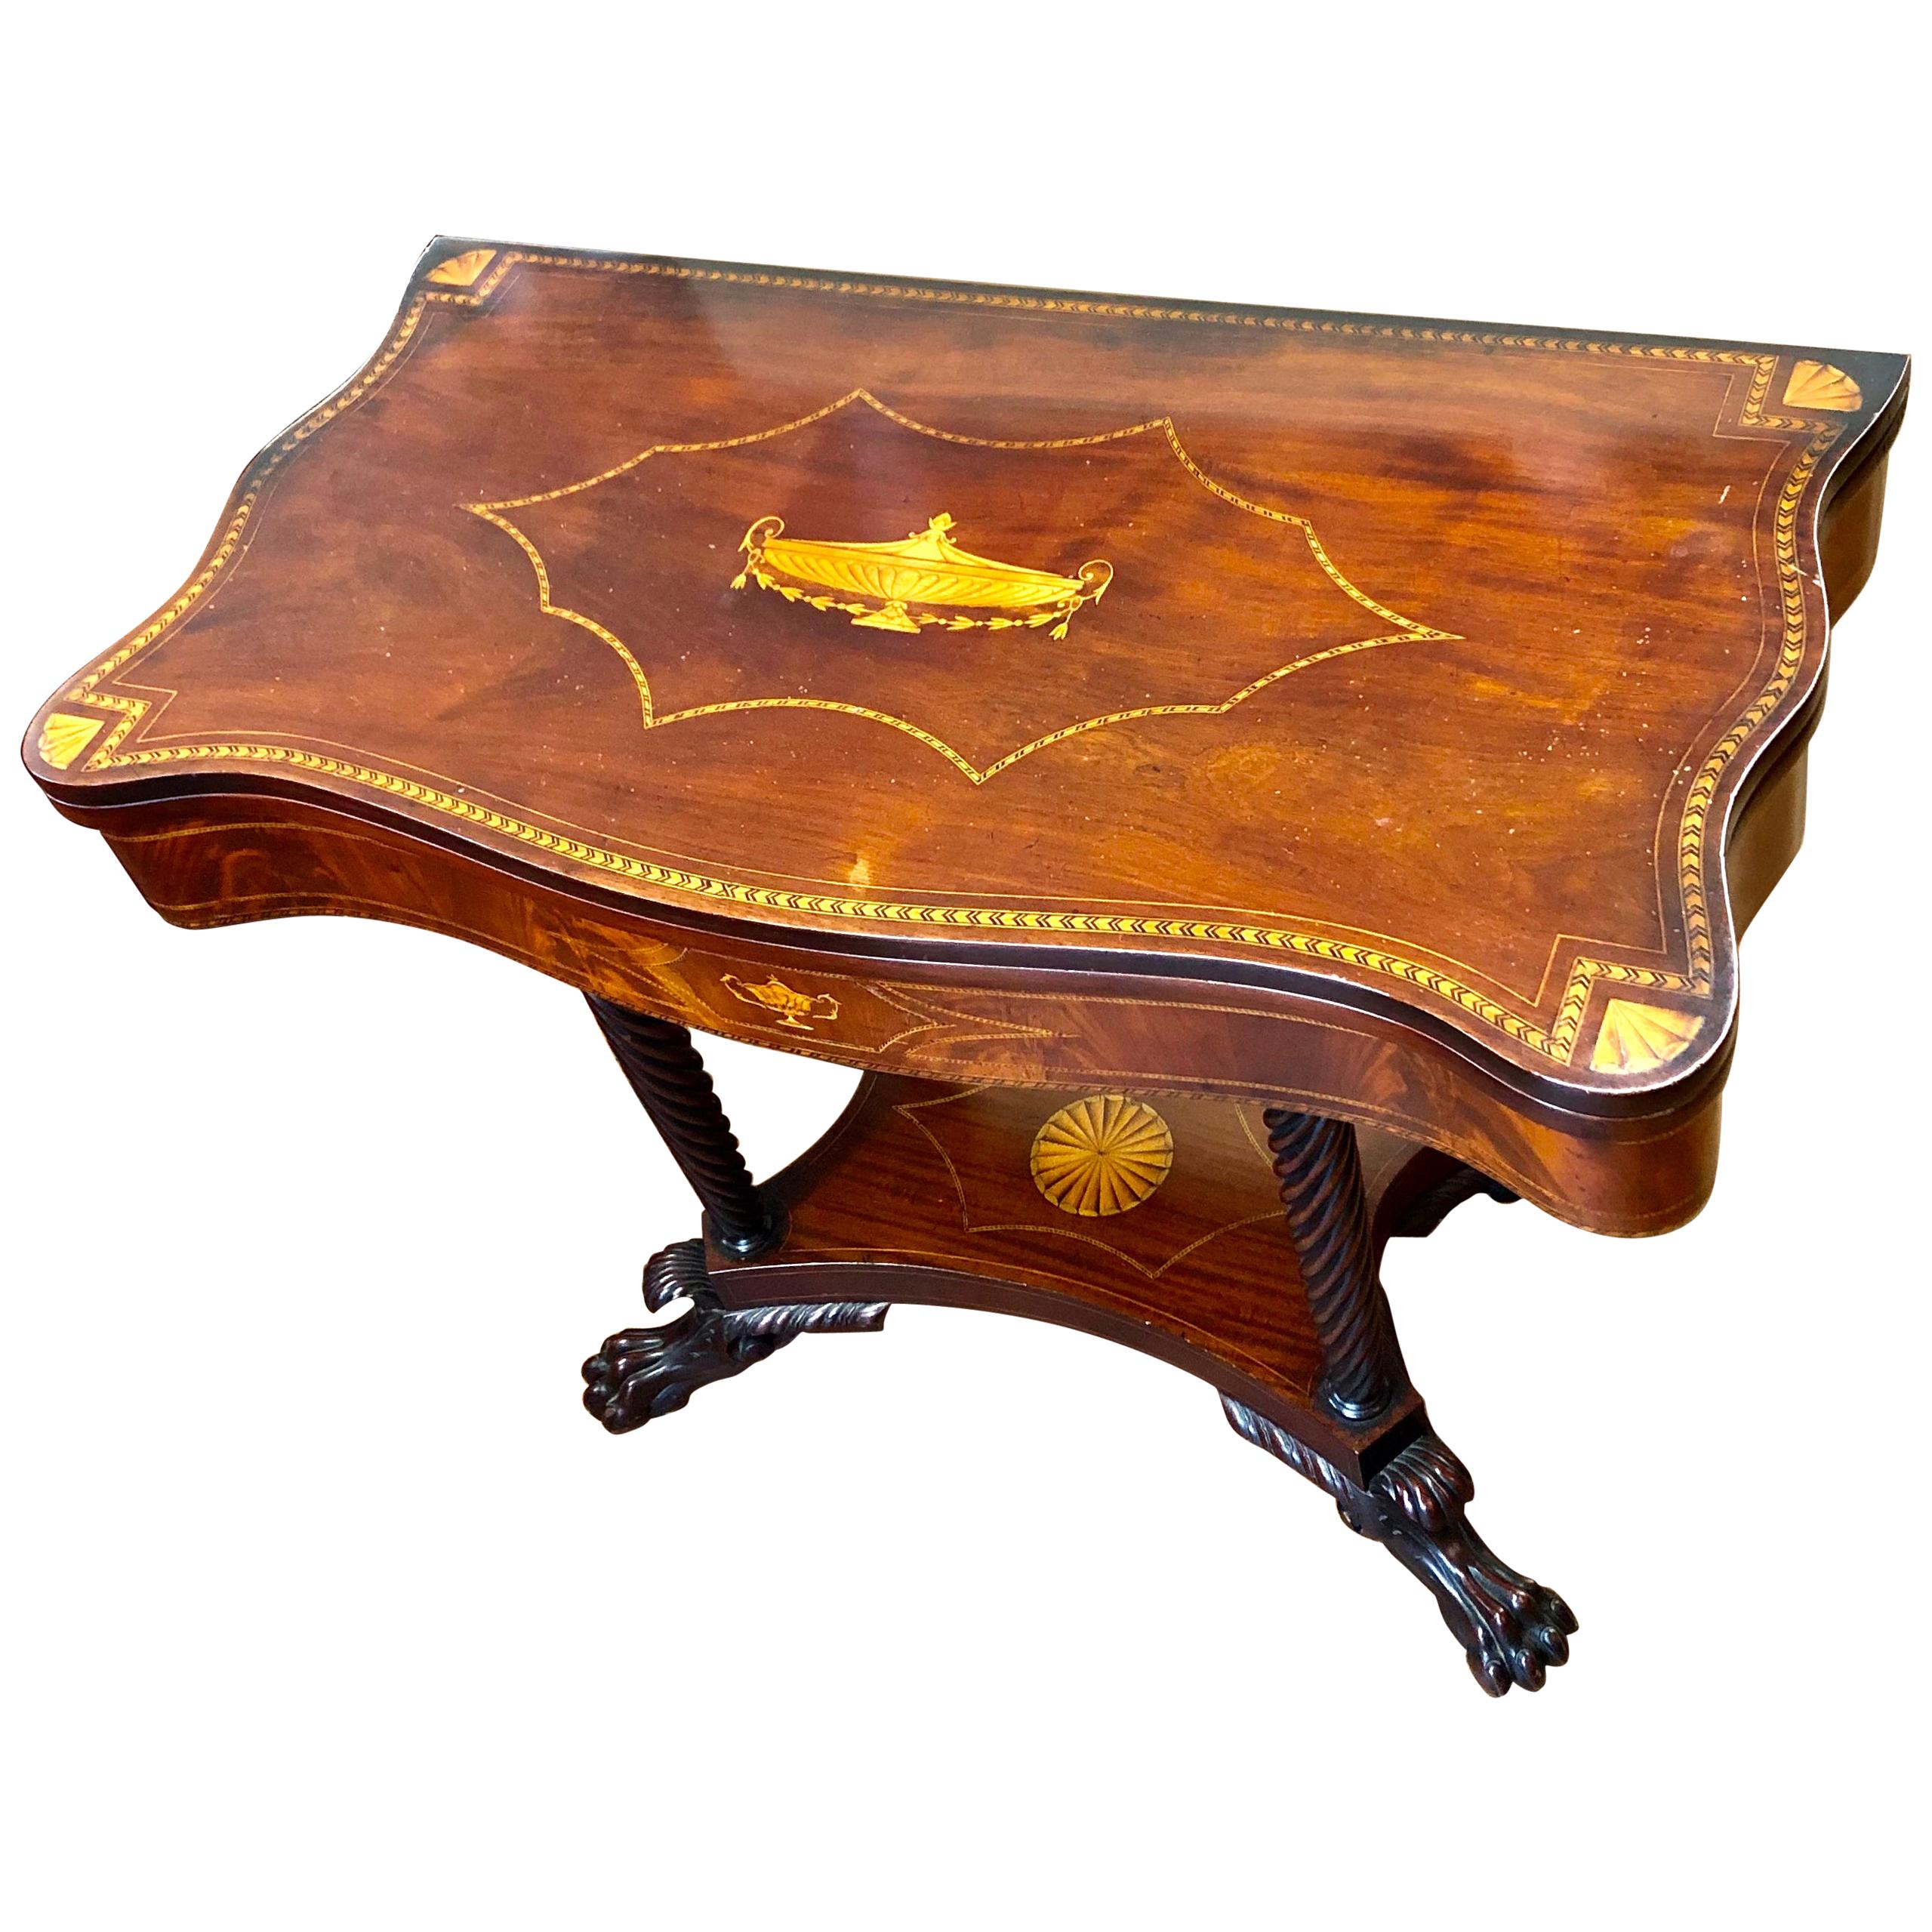 Extraordinary Antique American Late Federal Inlaid Mahogany Flap-Top Card Table